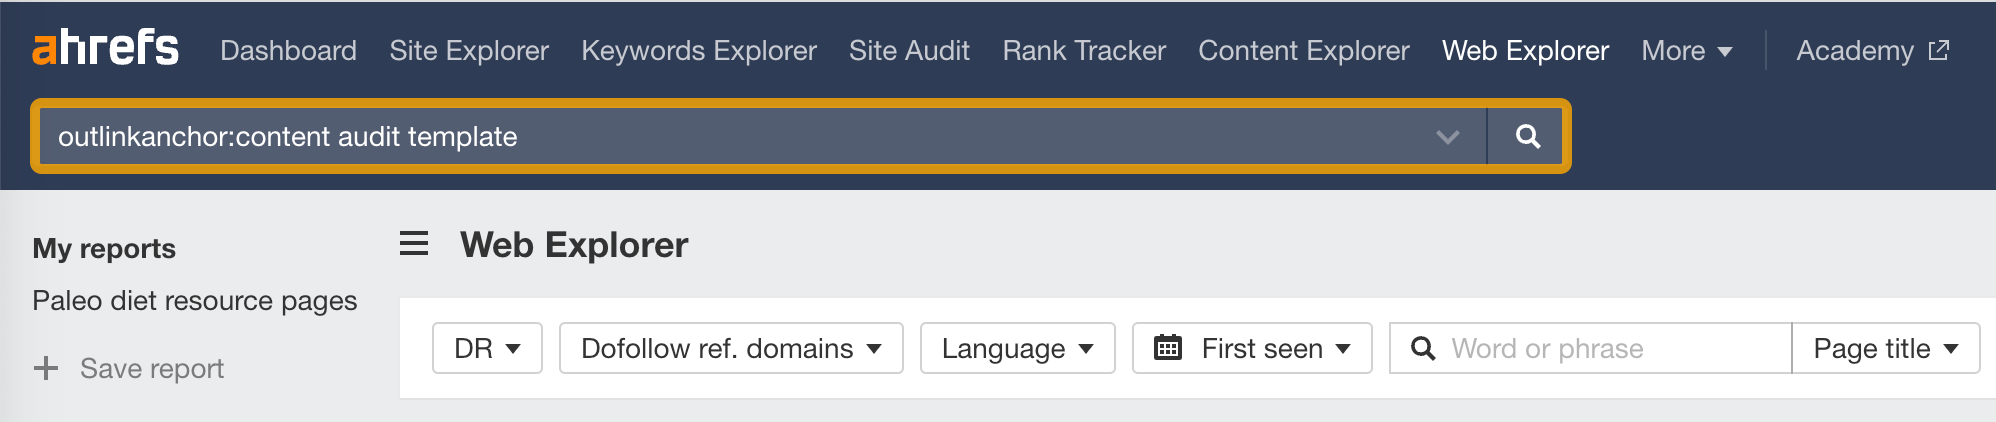 Find pages with a certain keyword in the anchor text of an outlink, via Ahrefs' Web Explorer